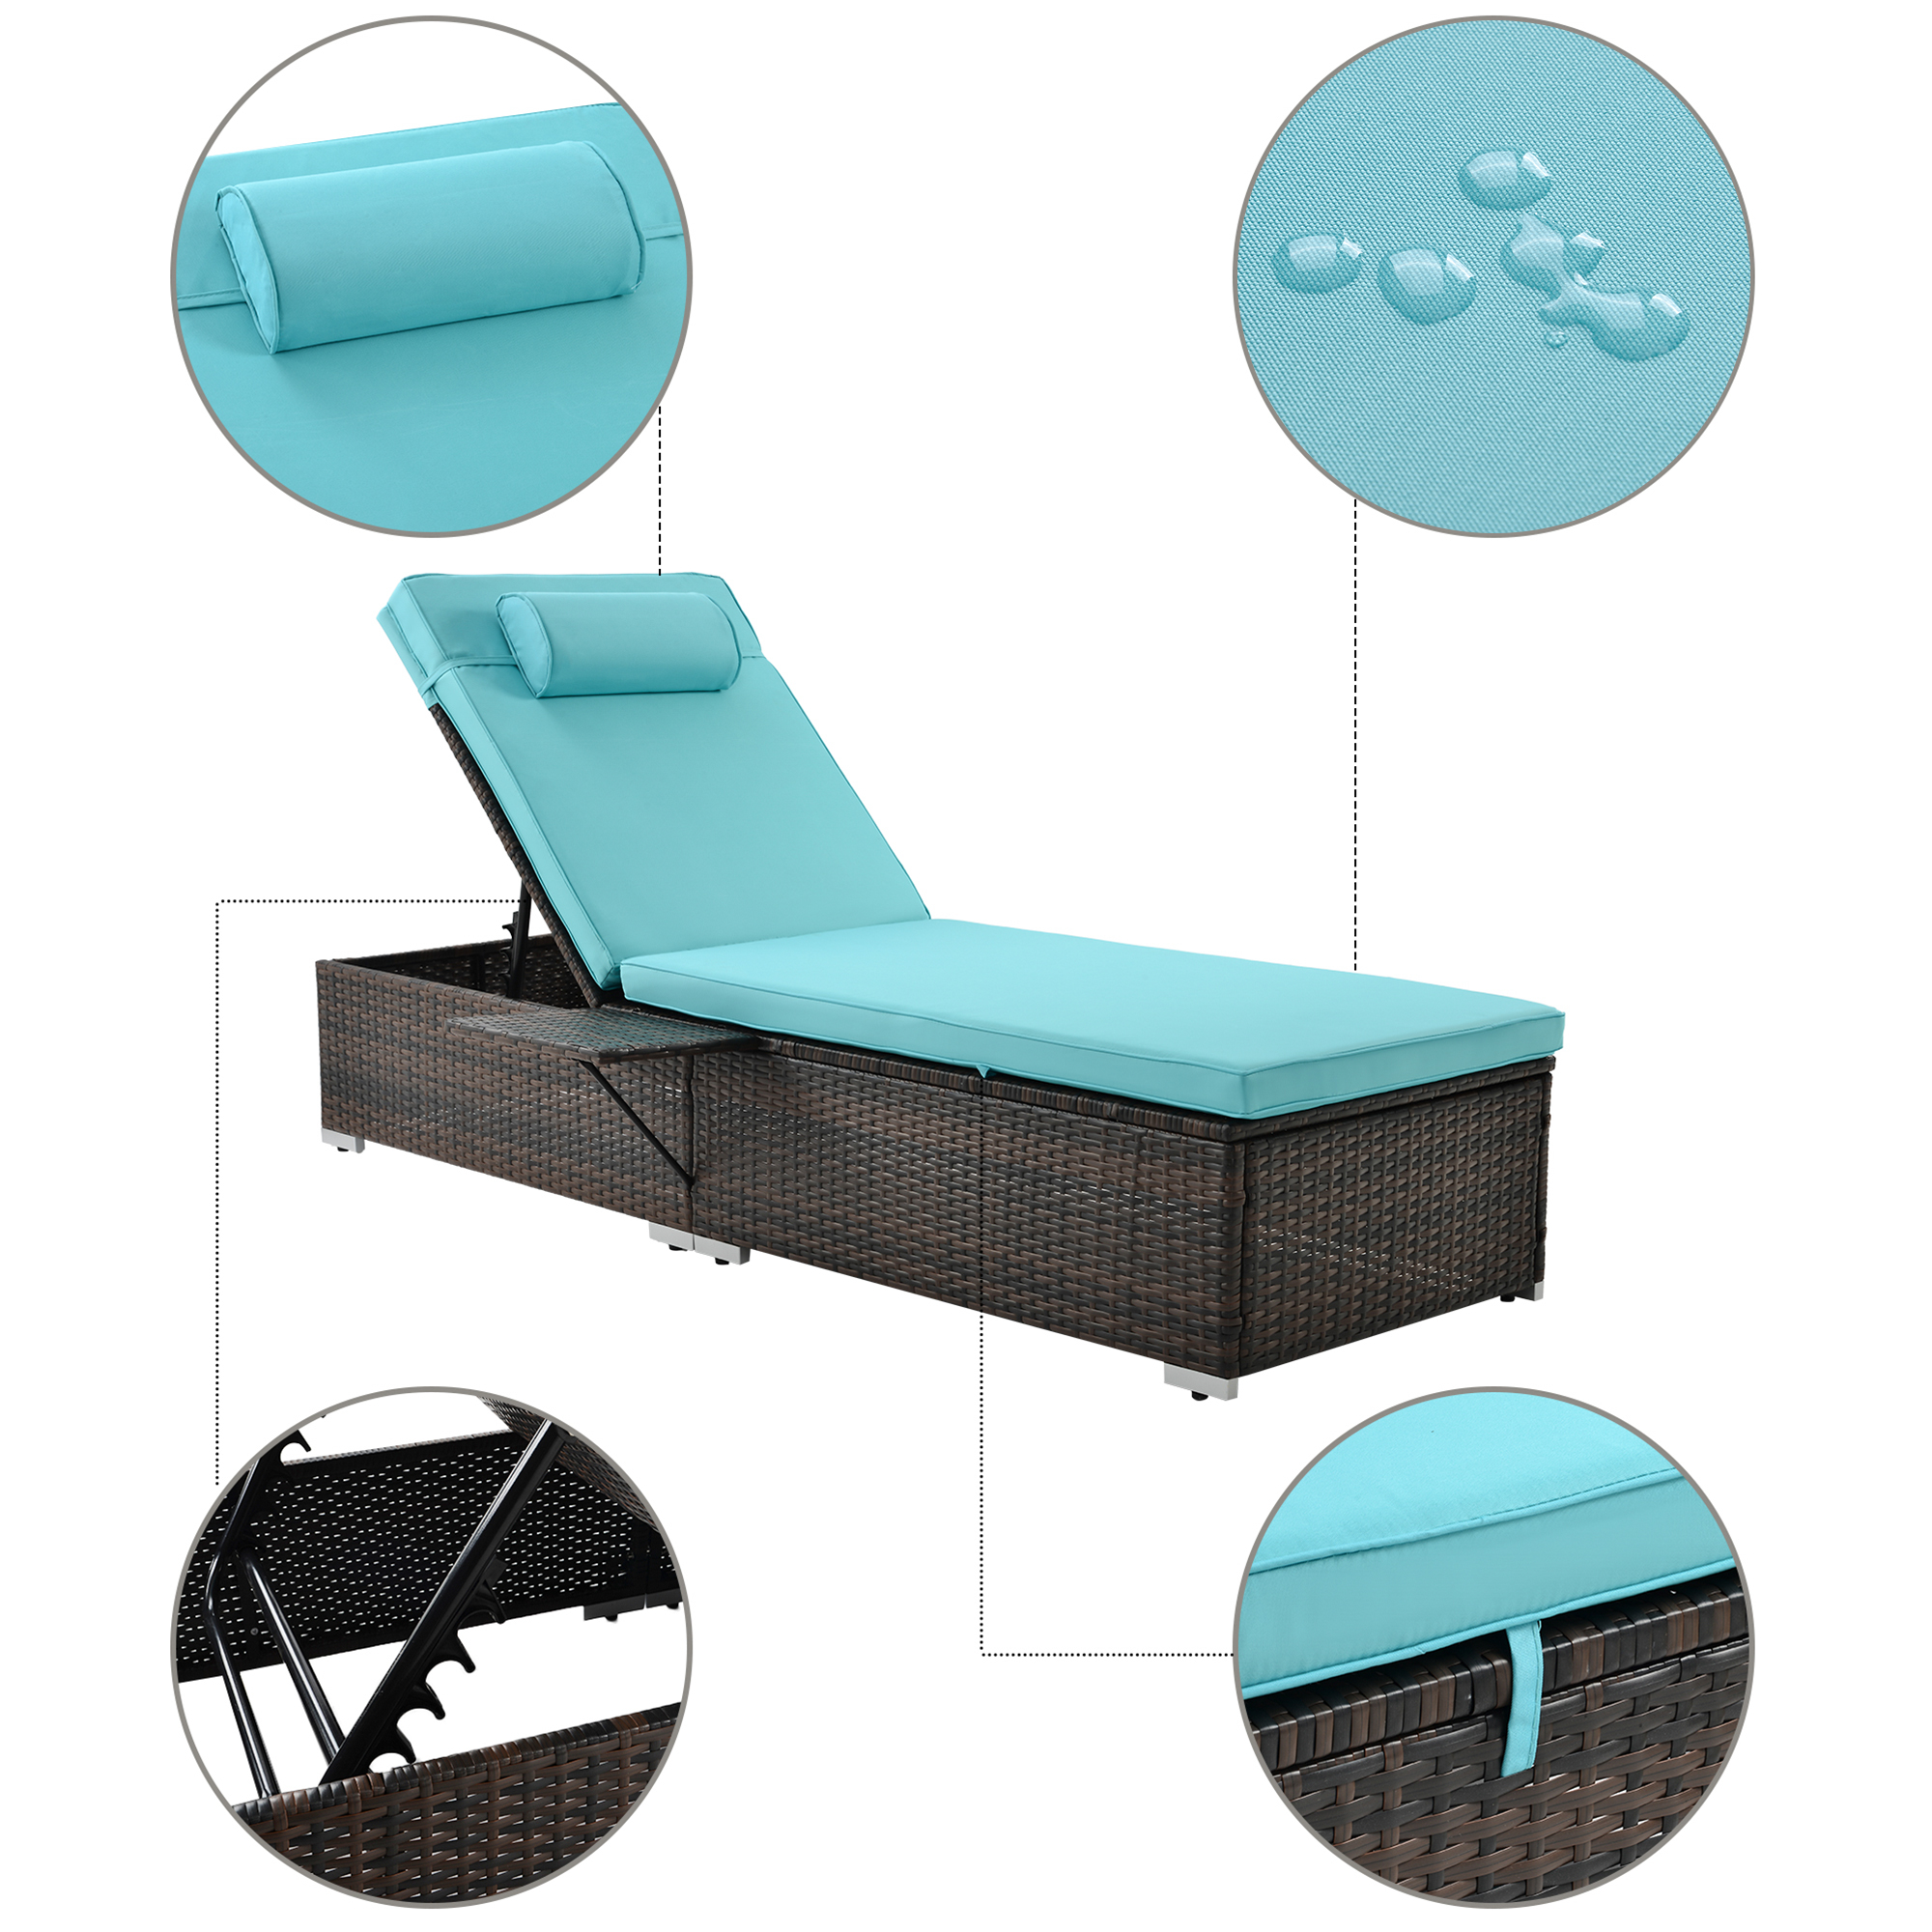 Set of 2 Rattan Chaise Lounge Chairs with Side Table, Outdoor Reclining Chairs Set W/Adjustable Backrest, Cushions and Head Pillow, Chaise Lounge Furniture Set for Poolside Beach Garden Patio, B19 - image 5 of 11